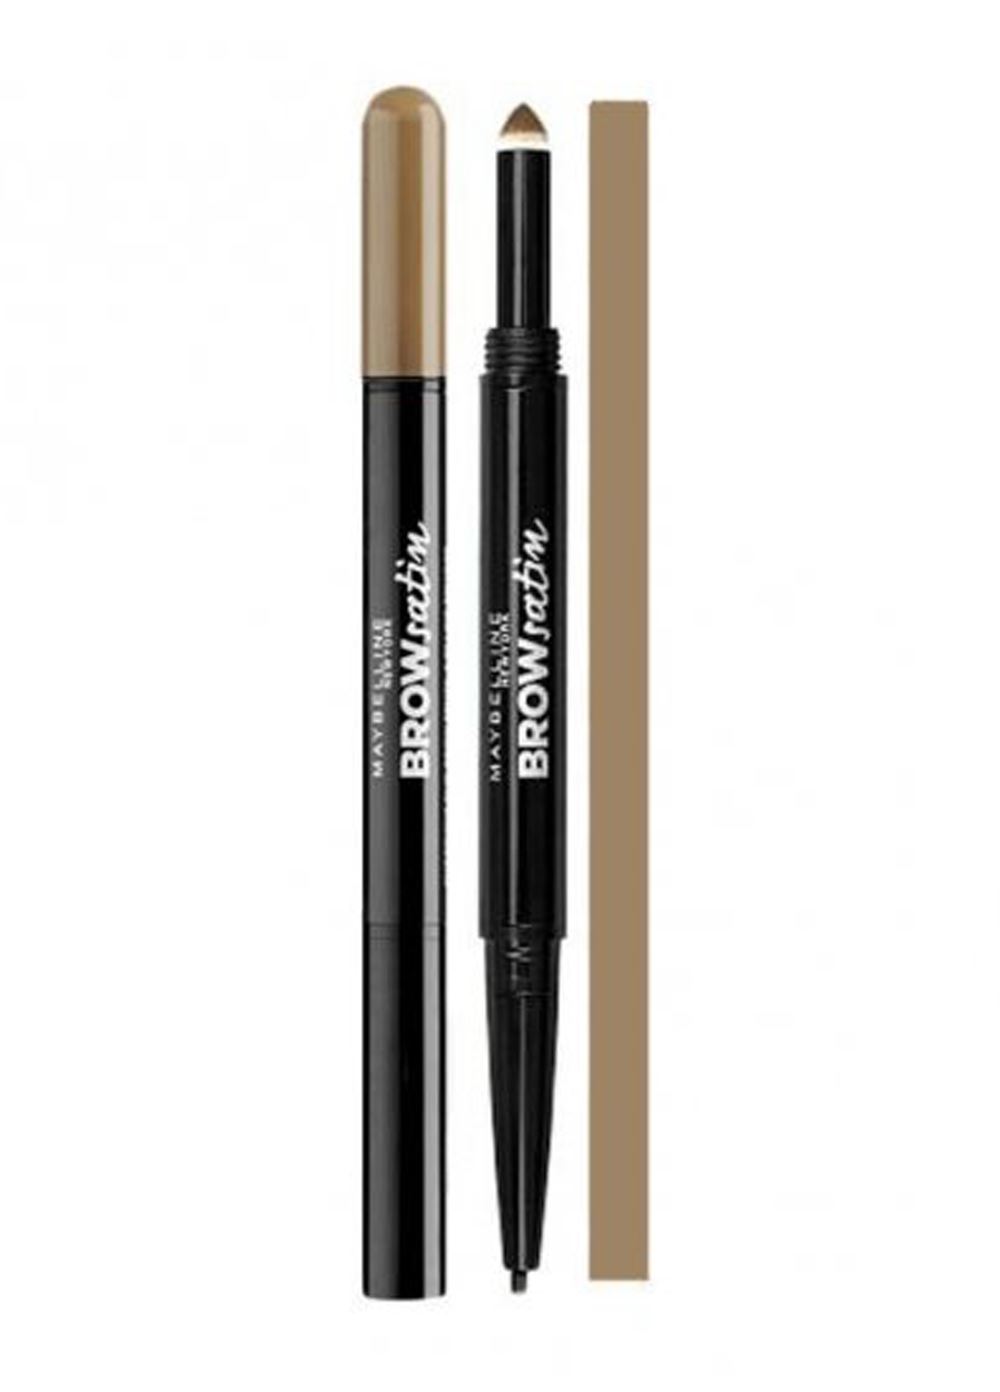 Nyc York Color Hd Eyebrow Dual Ended Pencil 001 Soft Brown